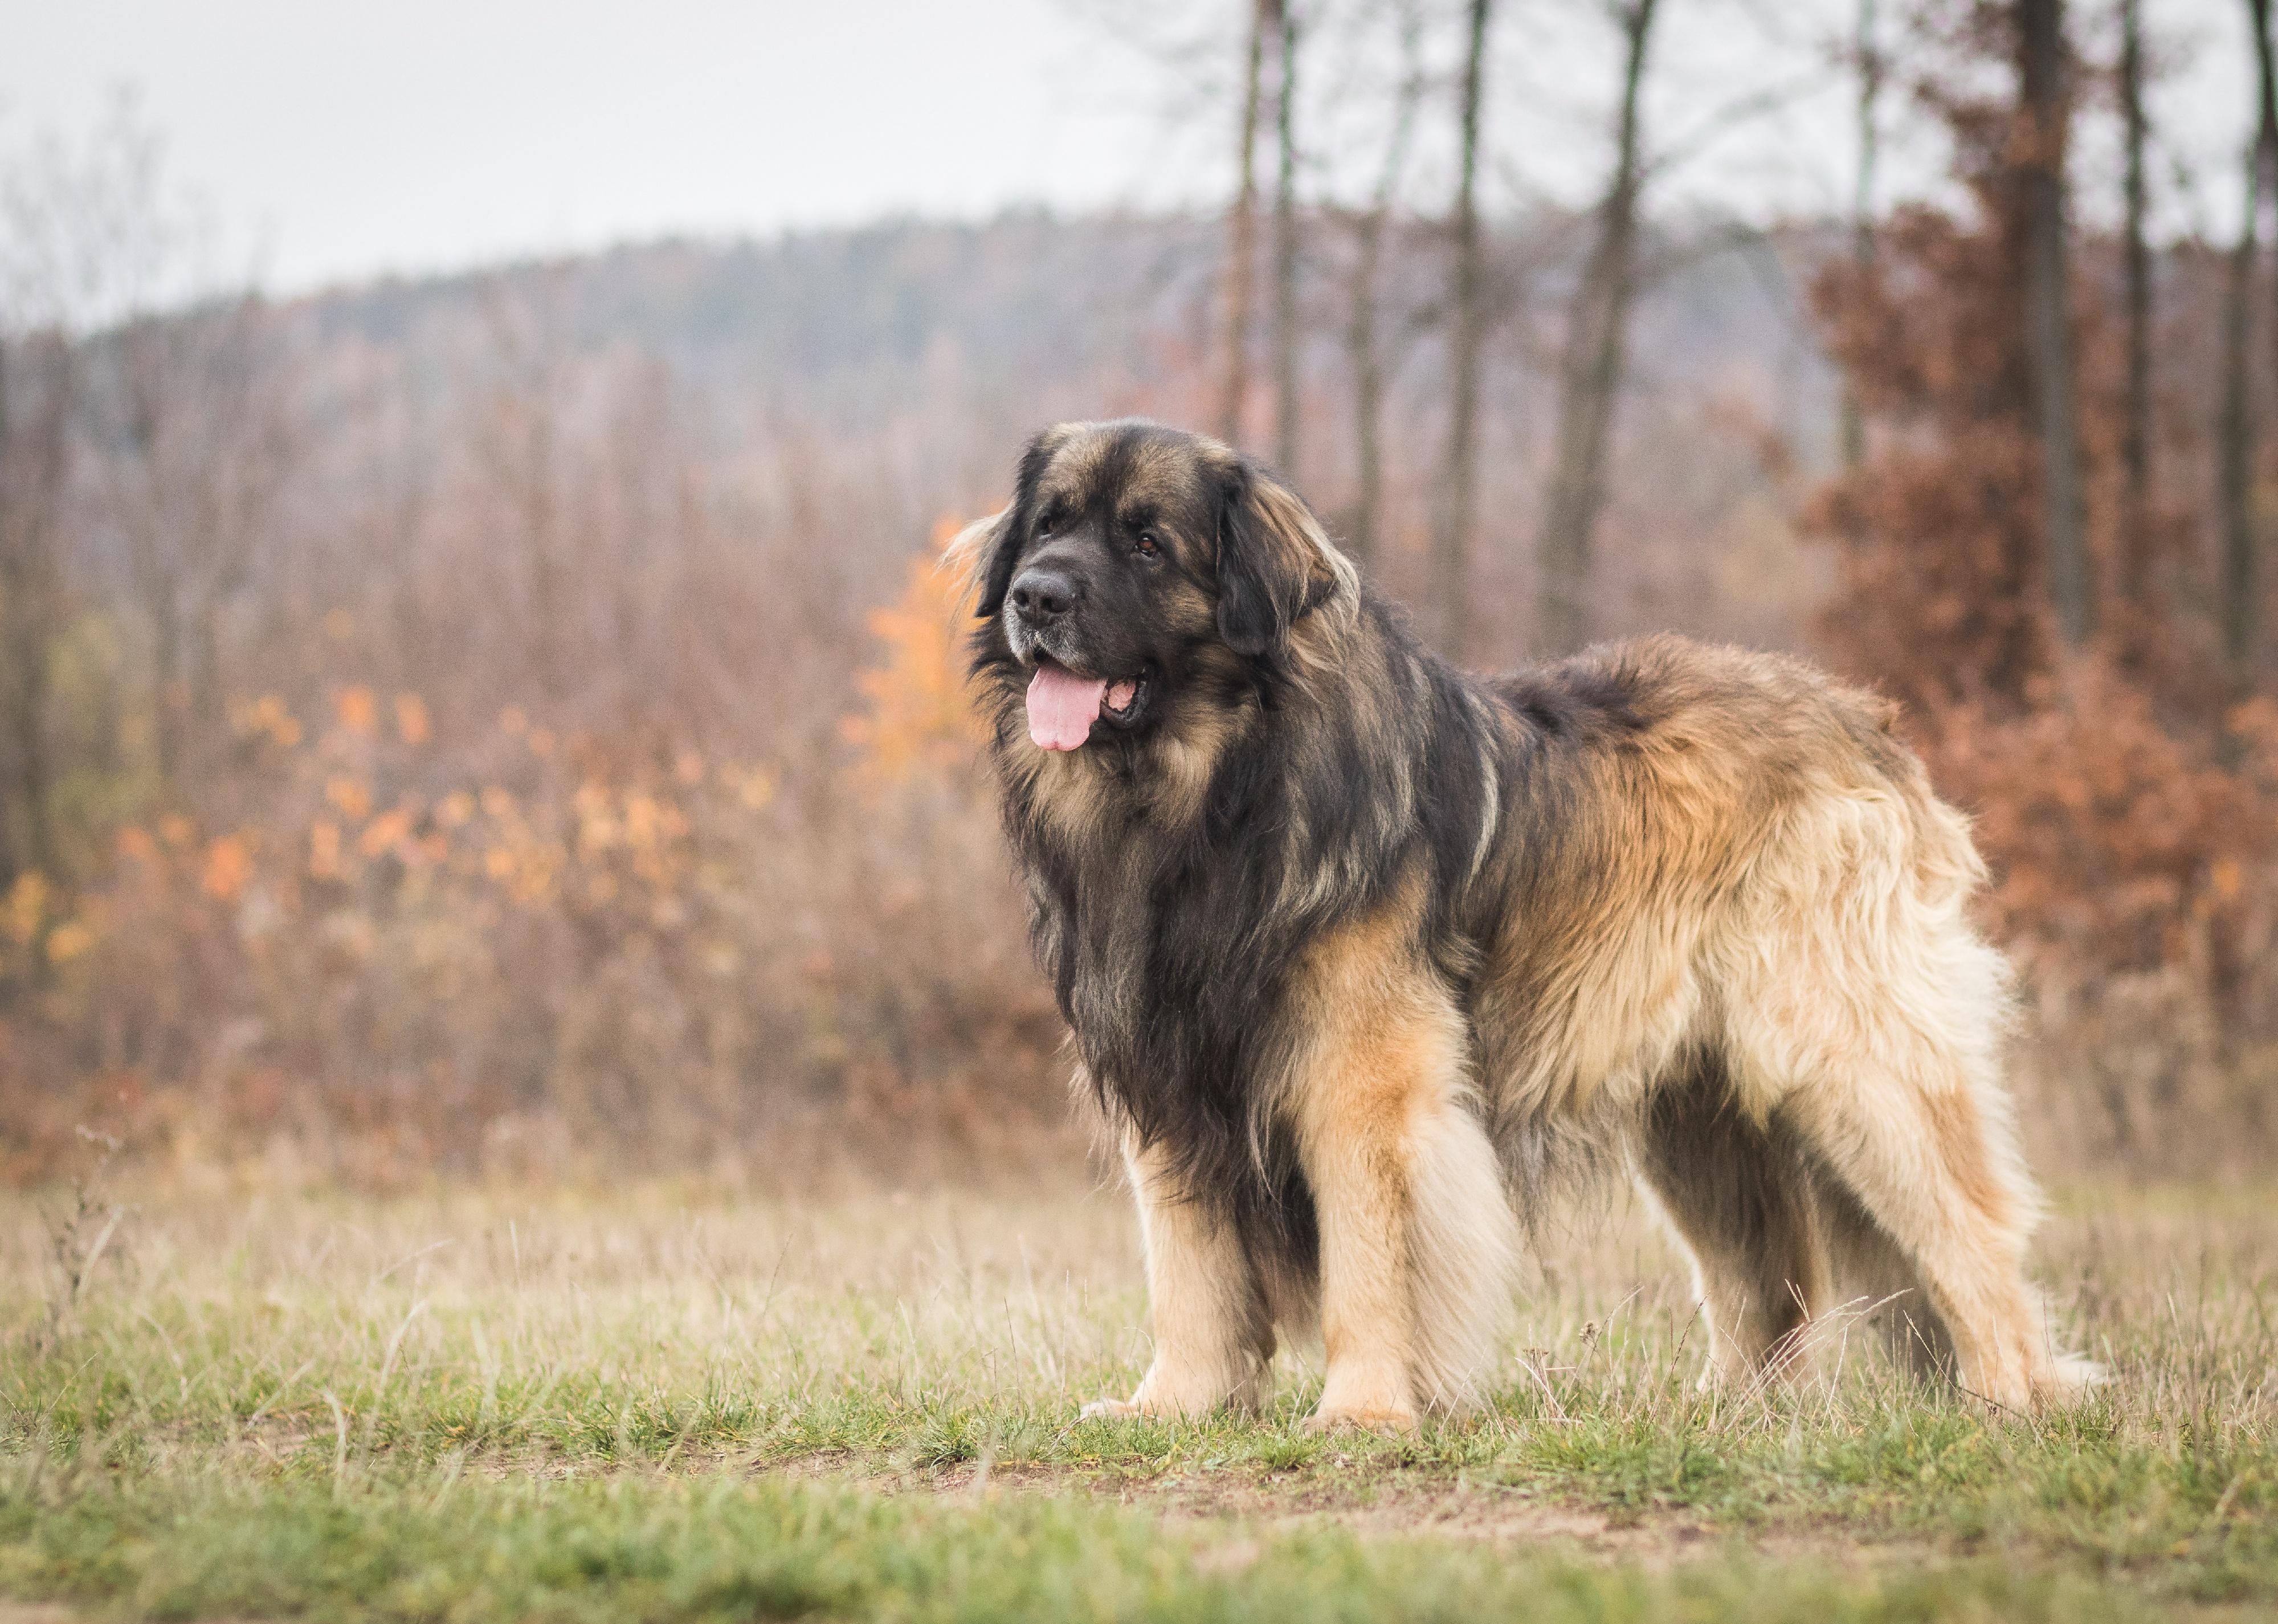 A young Leonberger in a autumn forest.